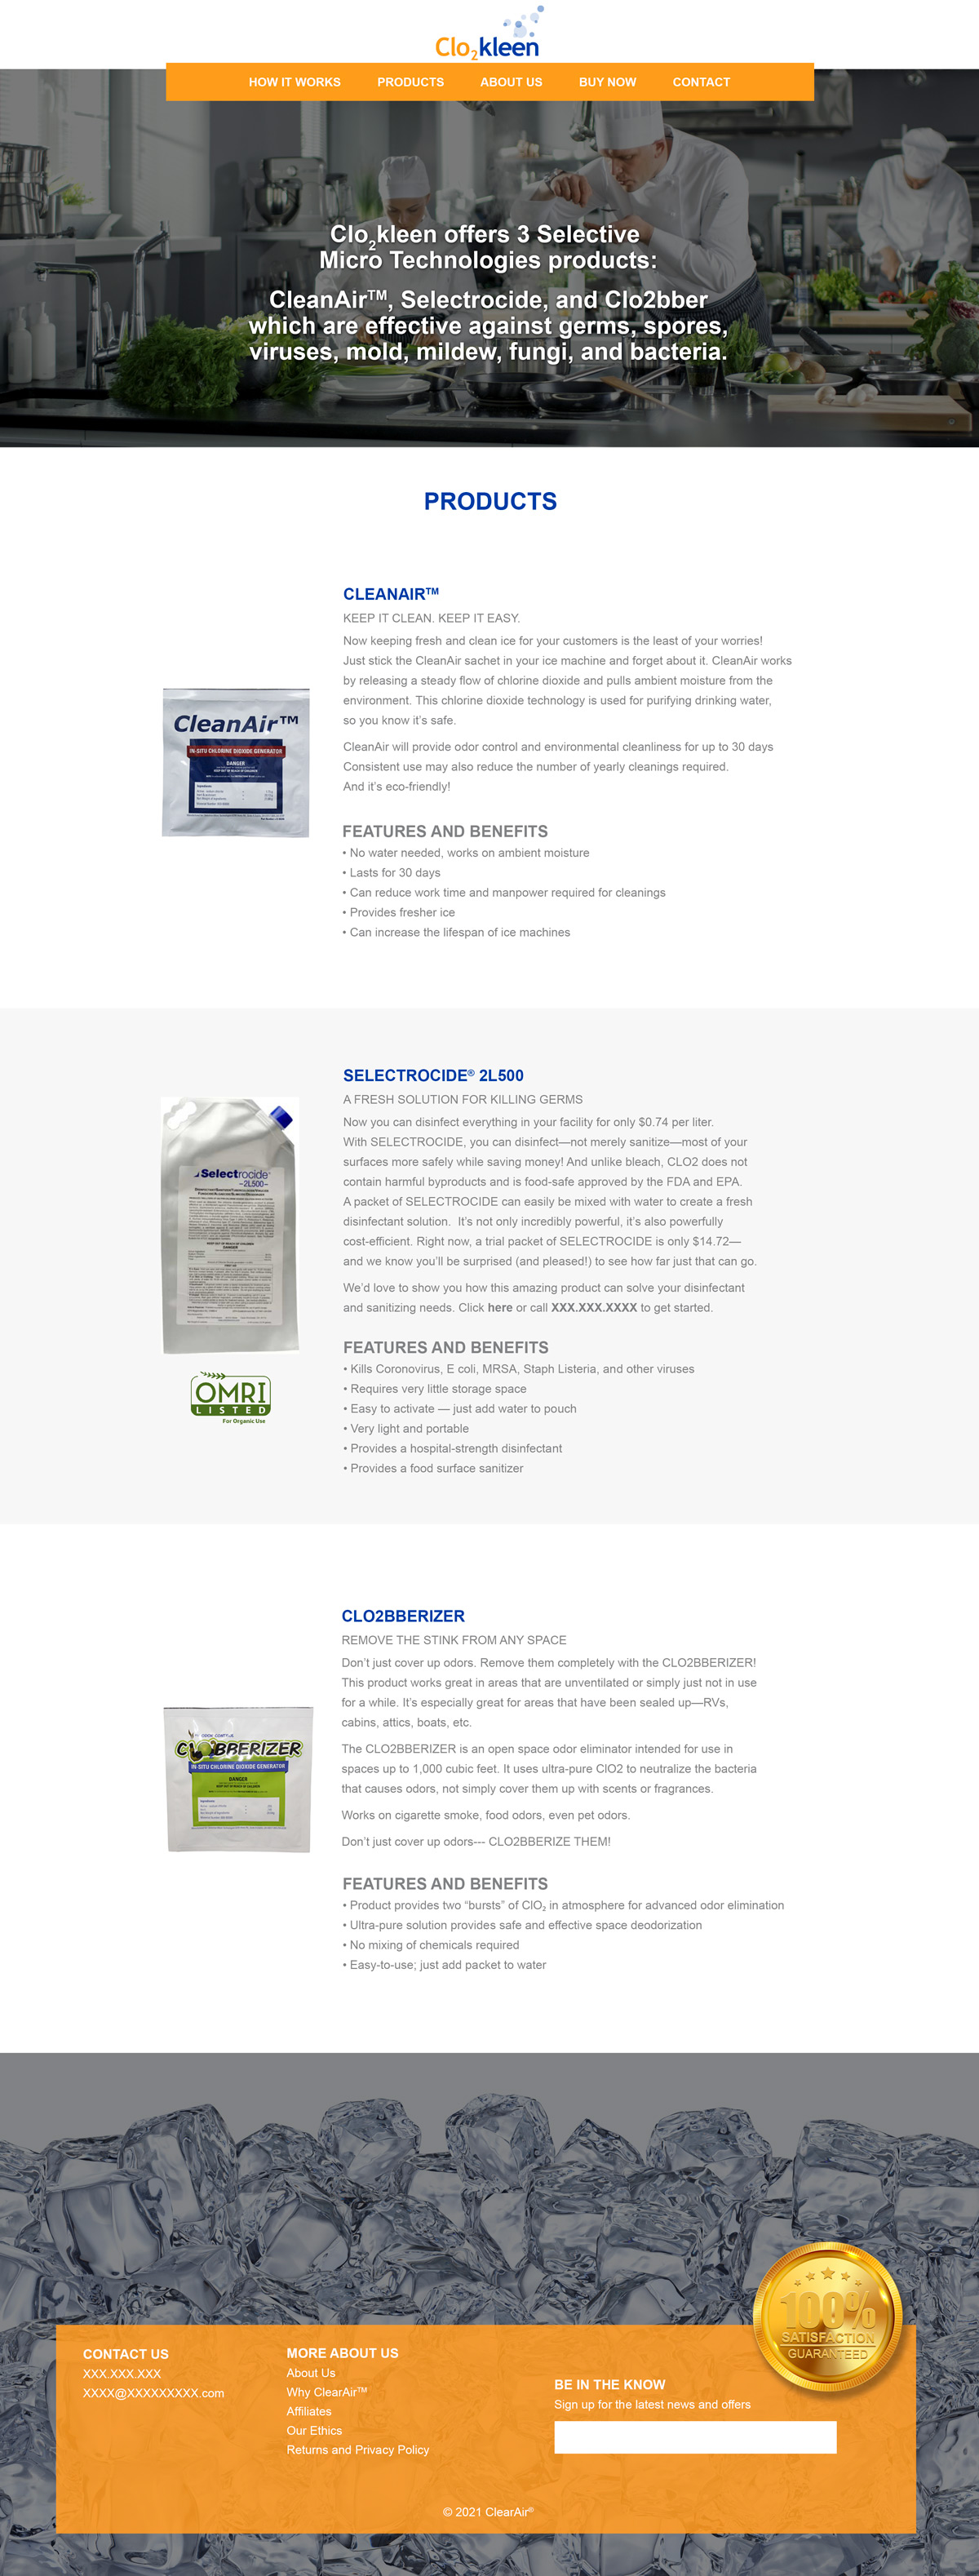 clo2kleen our products